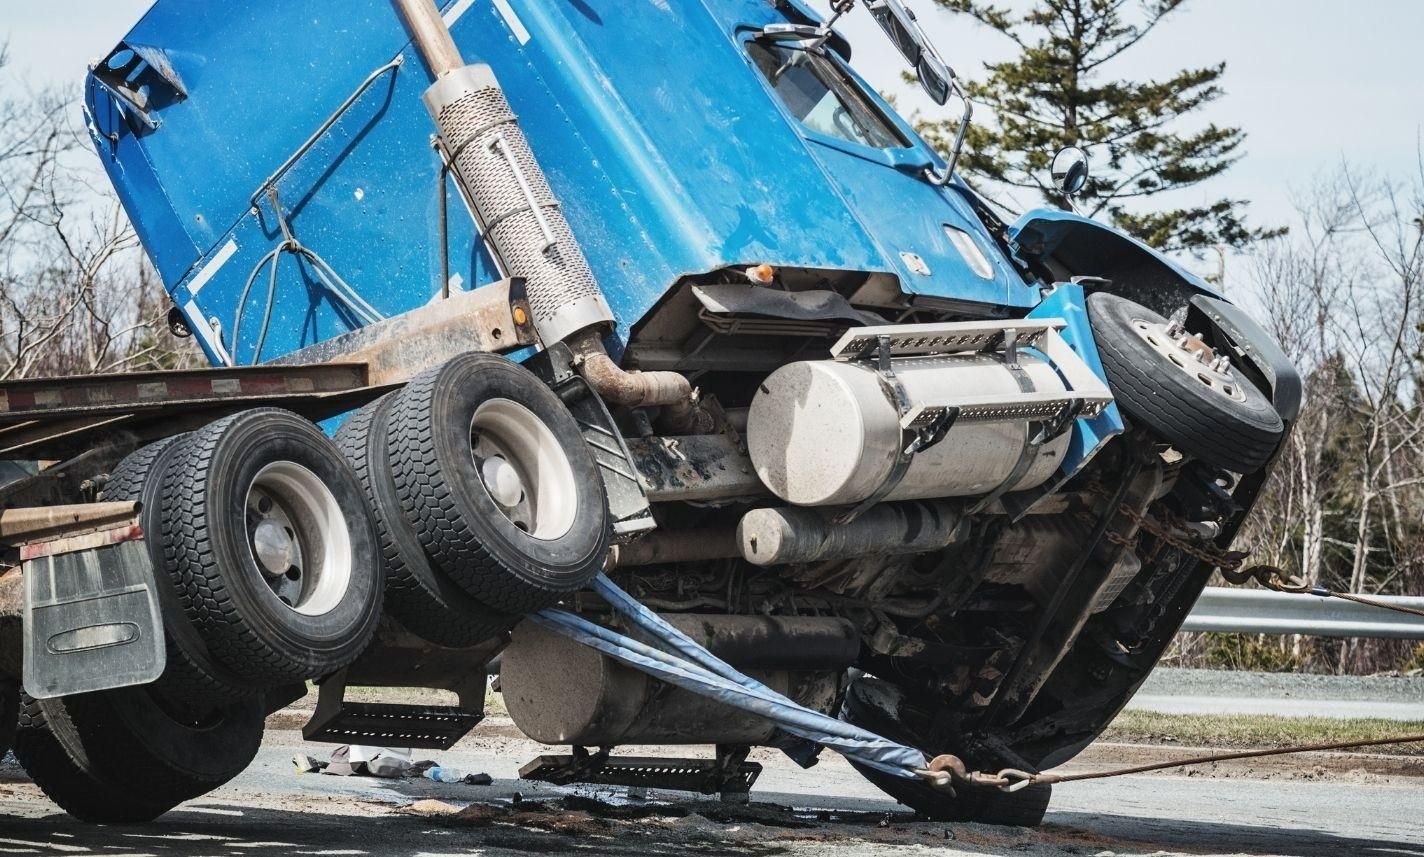 clarkston-commercial-truck-accident-injury-lawyer